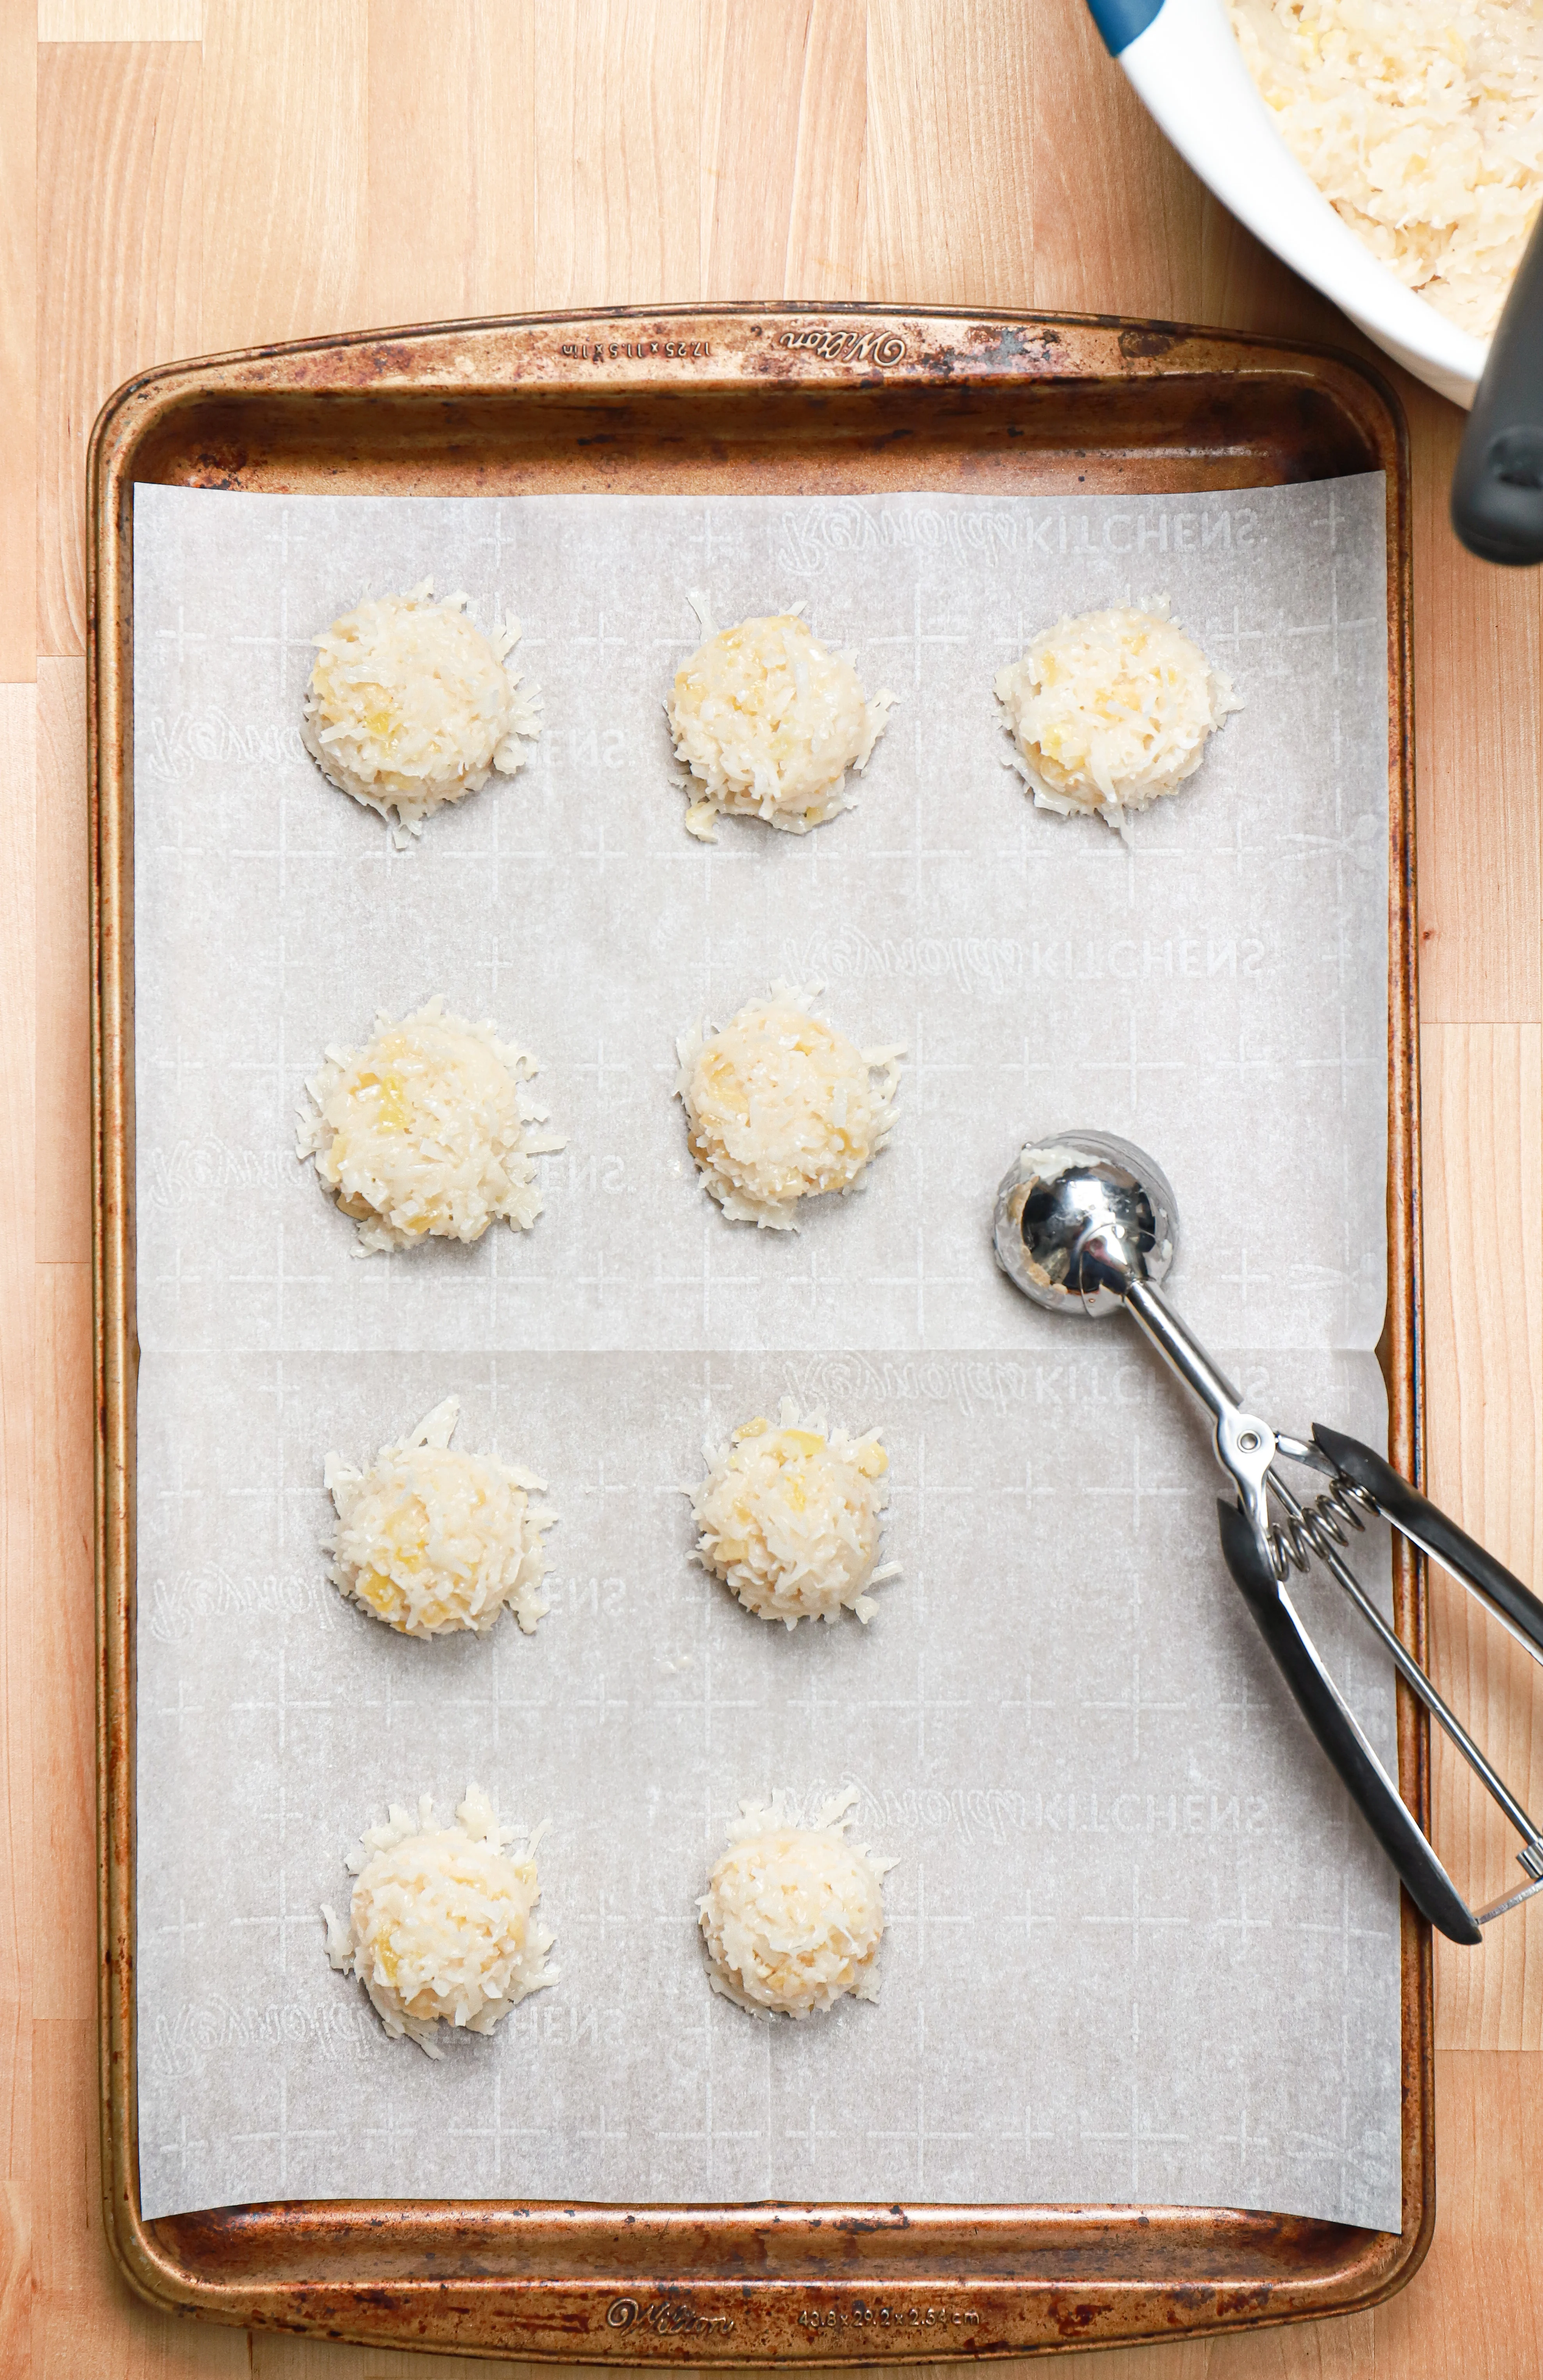 Overhead view of pineapple coconut macaroons on a parchment paper lined baking sheet before being baked.